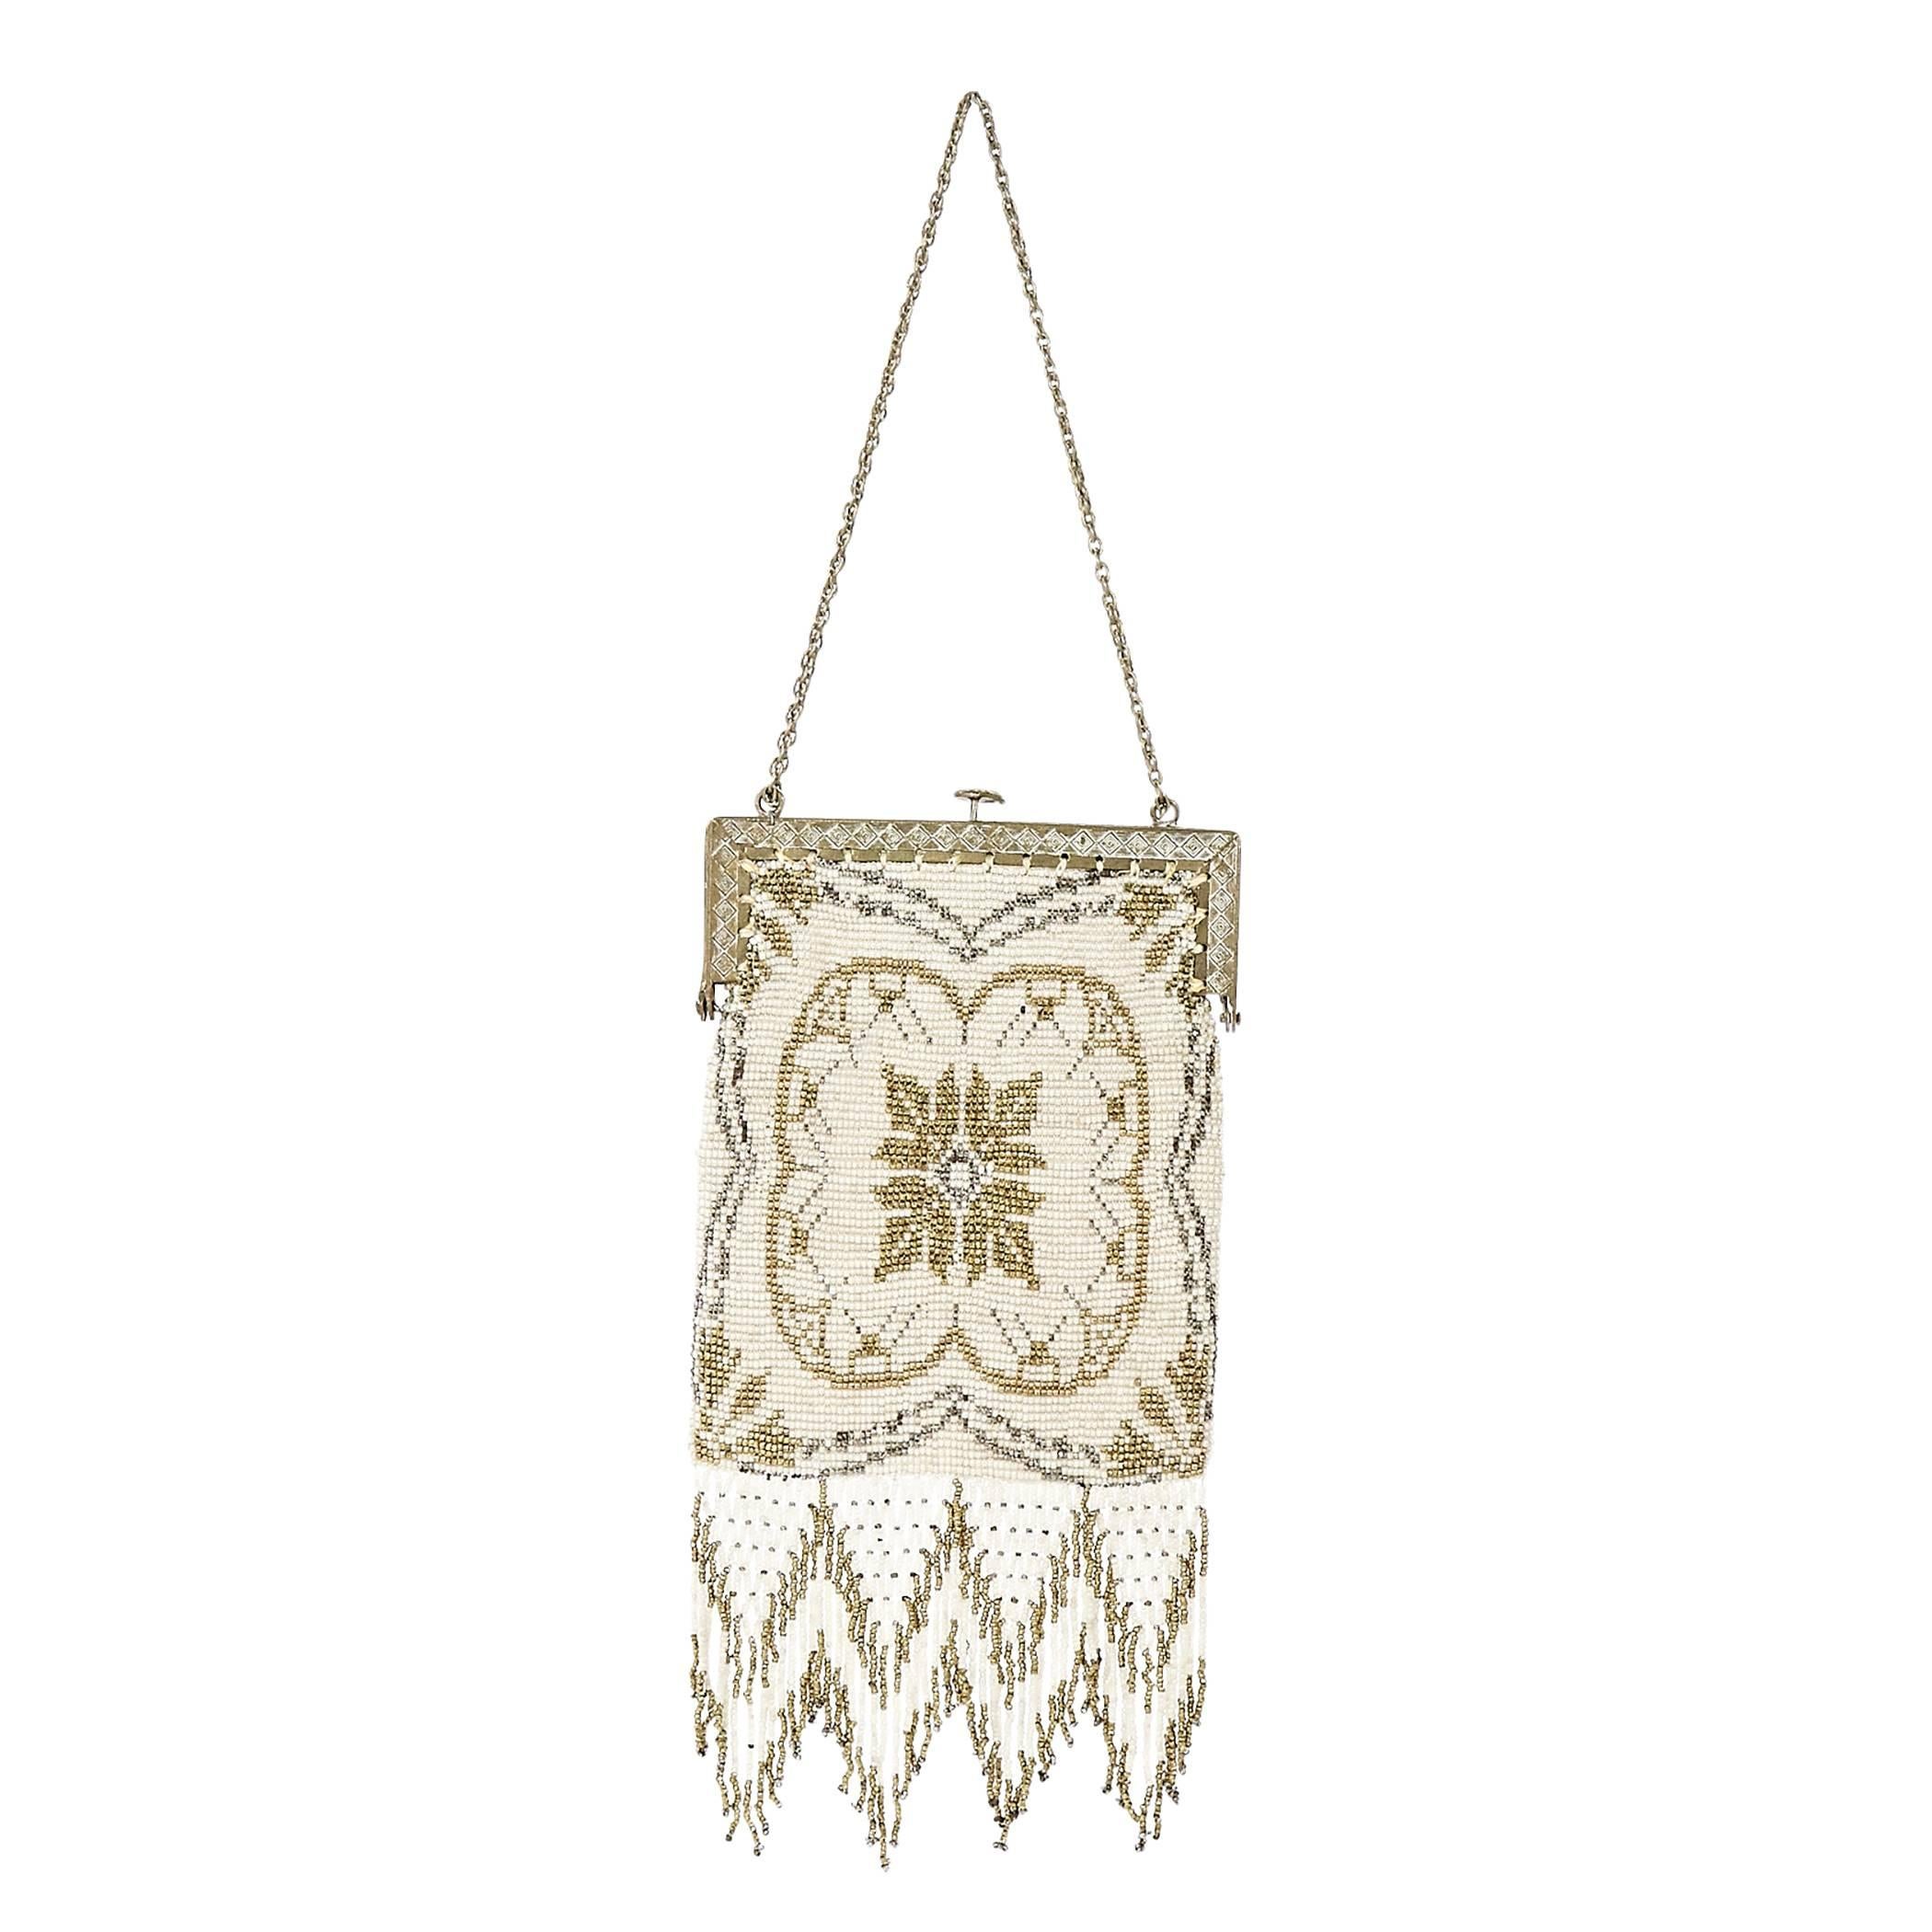 Ivory Whiting & Davis Vintage Beaded Clutch